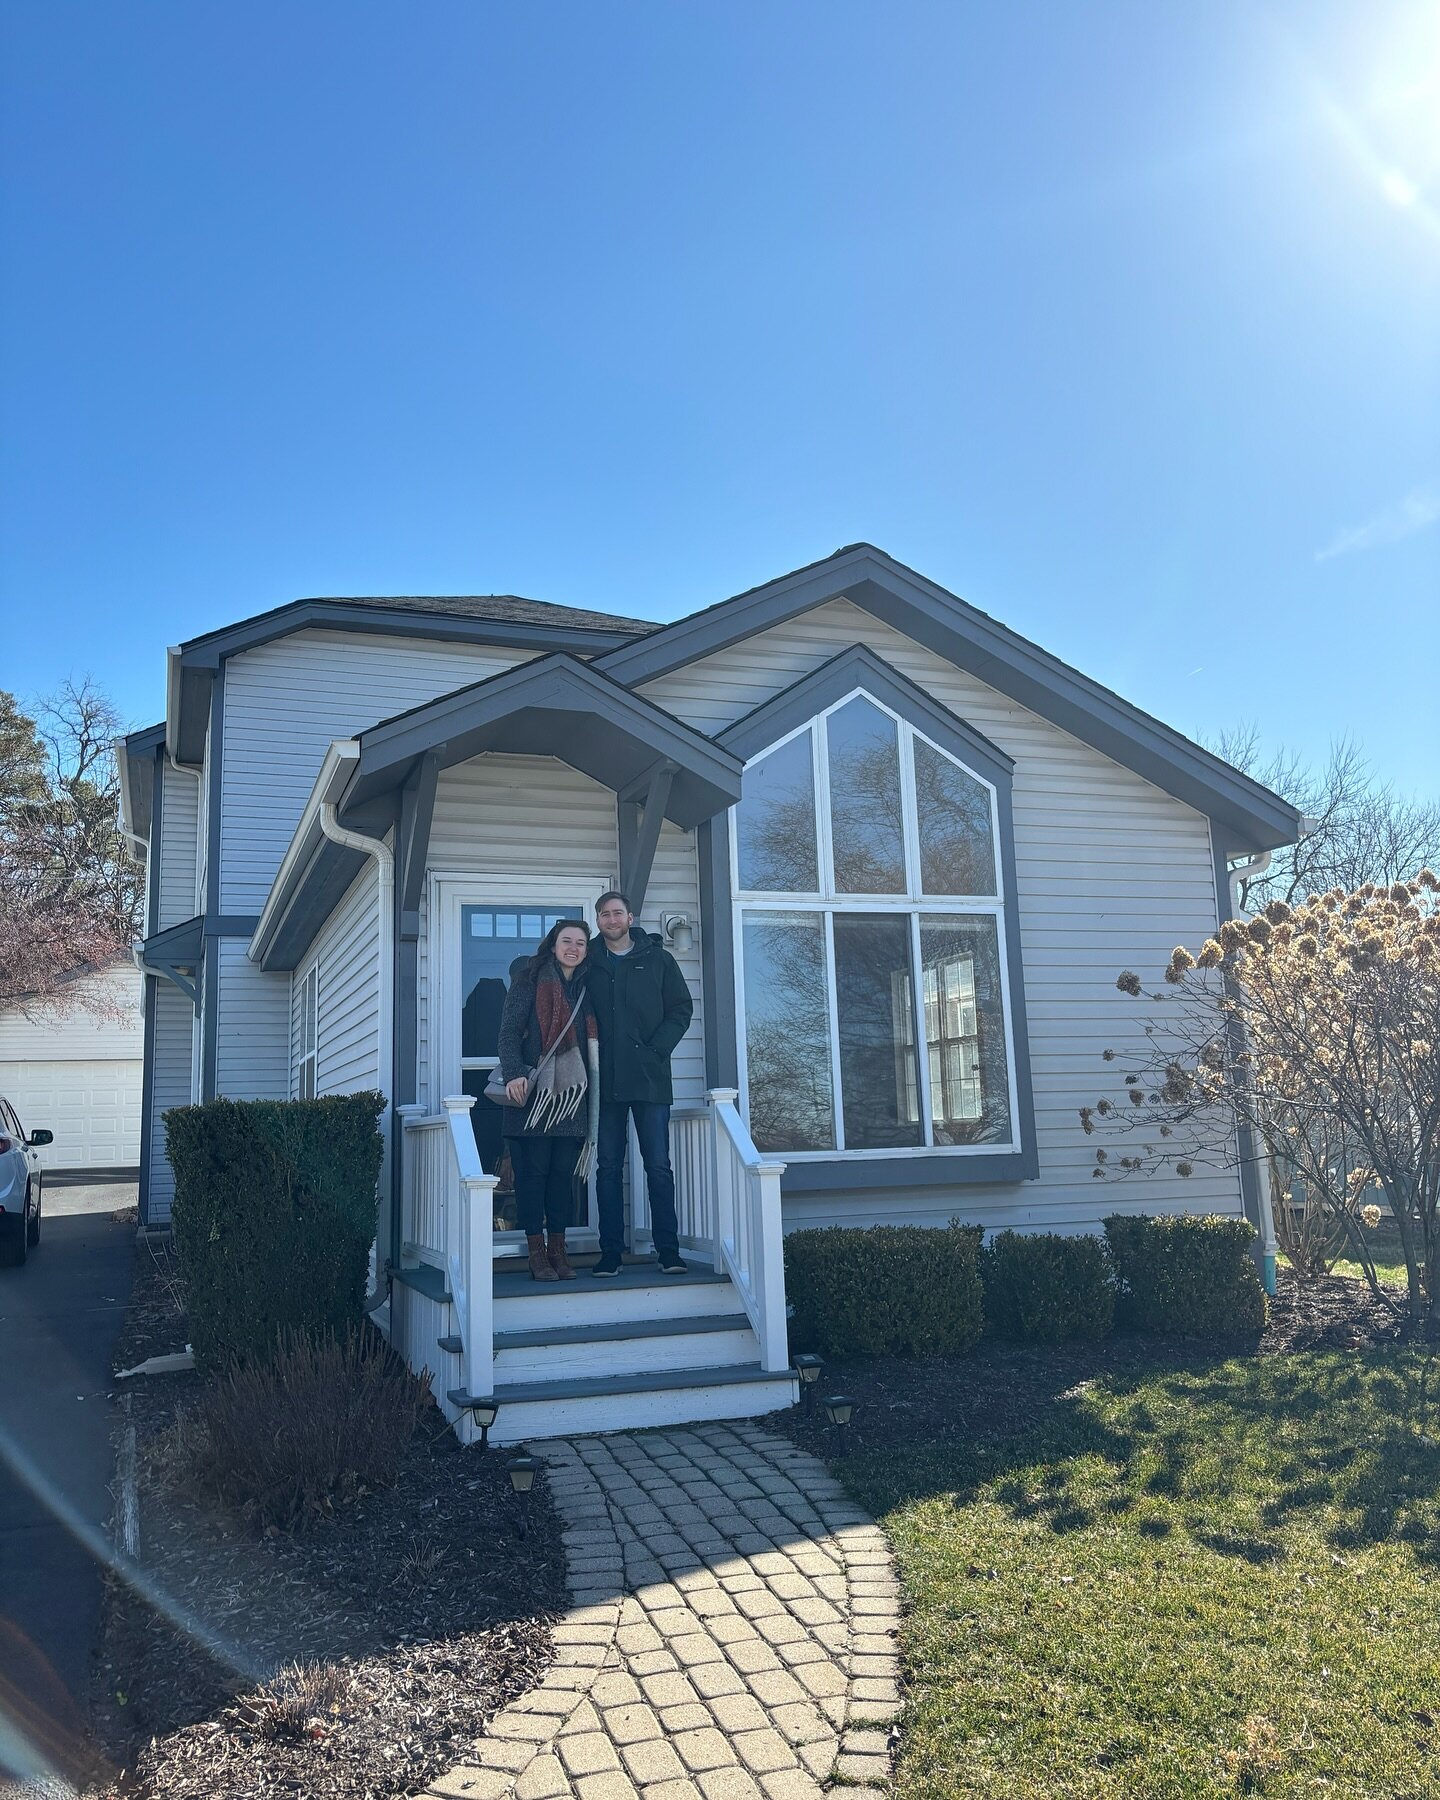 🥂 to Jimmy &amp; Lisa, Downers Grove&rsquo;s newest residents! This was a special one, getting to help a college friend and his awesome wife find their perfect home in the western suburbs. We toured the property on a cold, snowy Saturday afternoon i